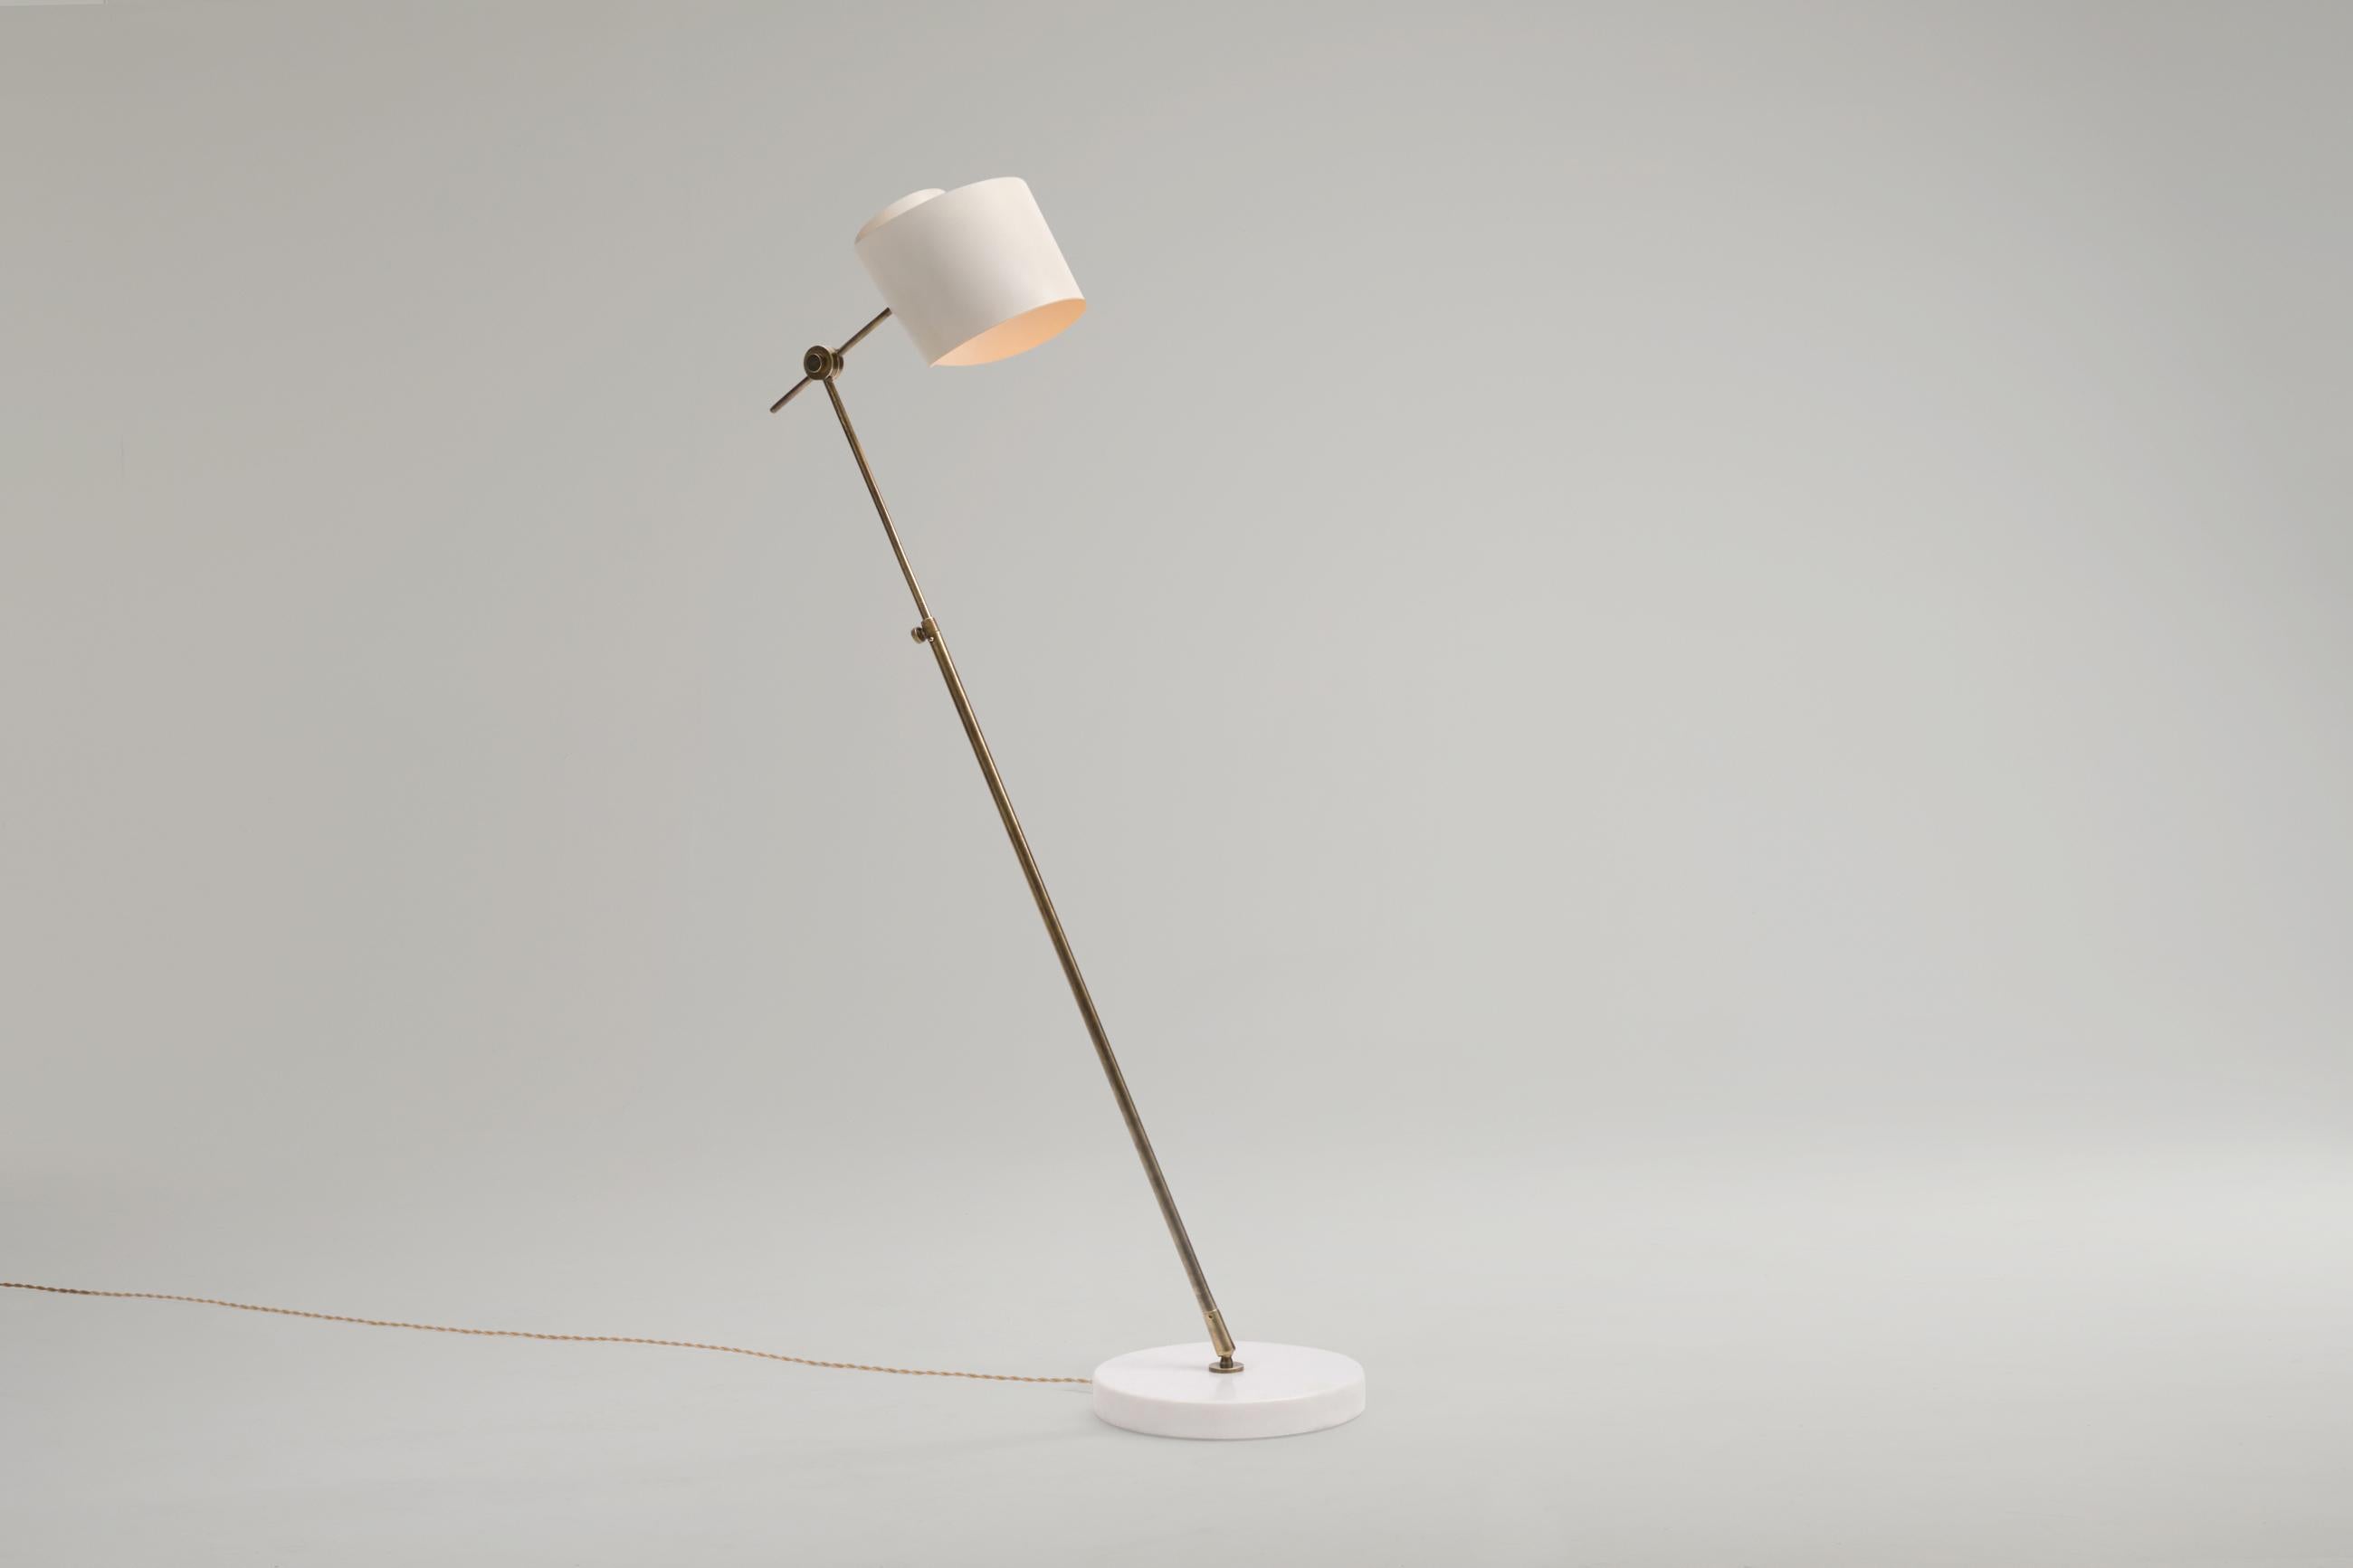 Stunning and rarely seen floor lamp by Tito Agnoli for Oluce, Italy, 1950's. Rare model with unusual shade 'spinnaker' shaped shade made out of aluminium, a brass stem and a clear white marble base. Very intelligent design with inventive technical